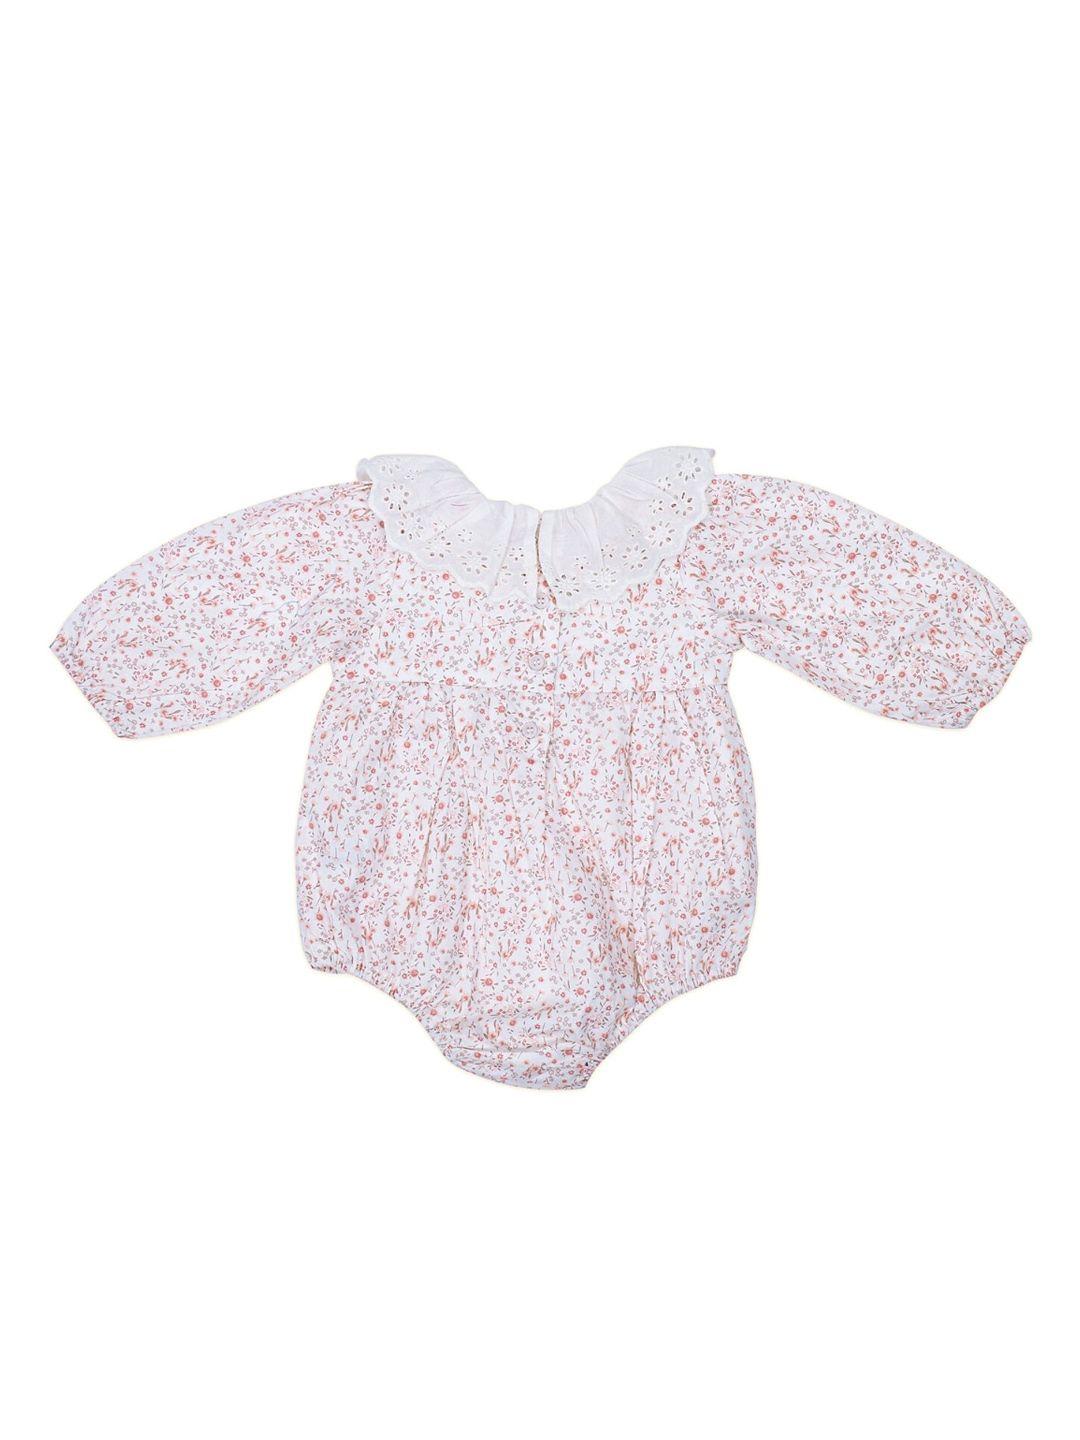 haus & kinder Kids Printed Cotton Ruffle Rompers